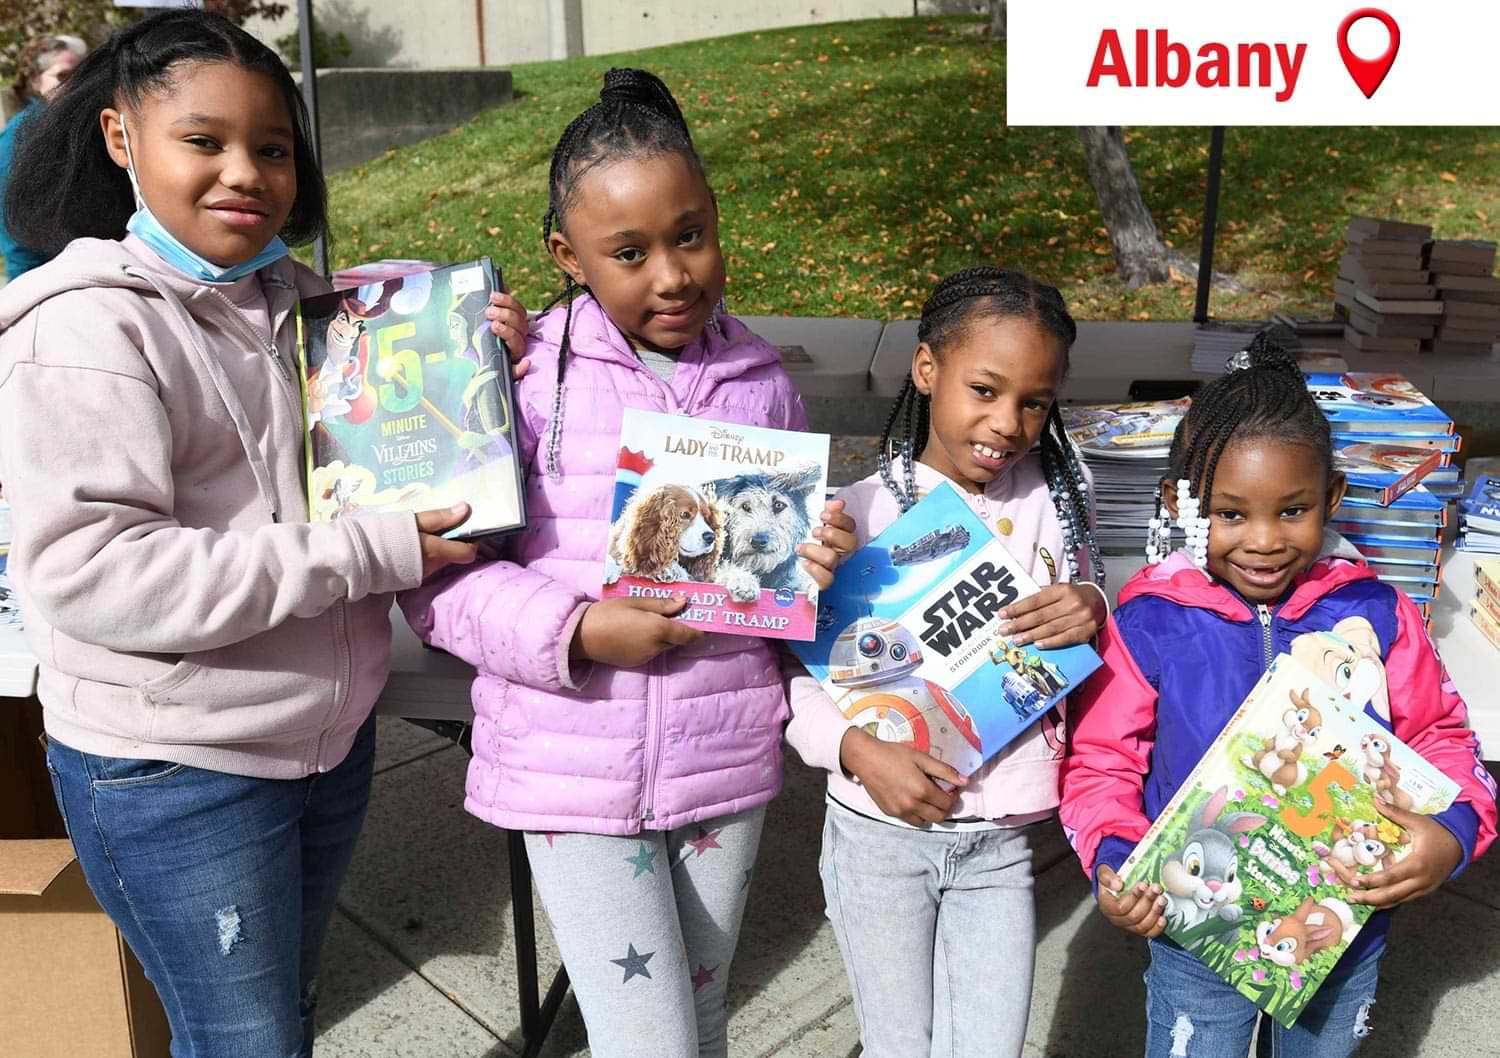 four young girls in Albany hold children's books at an event